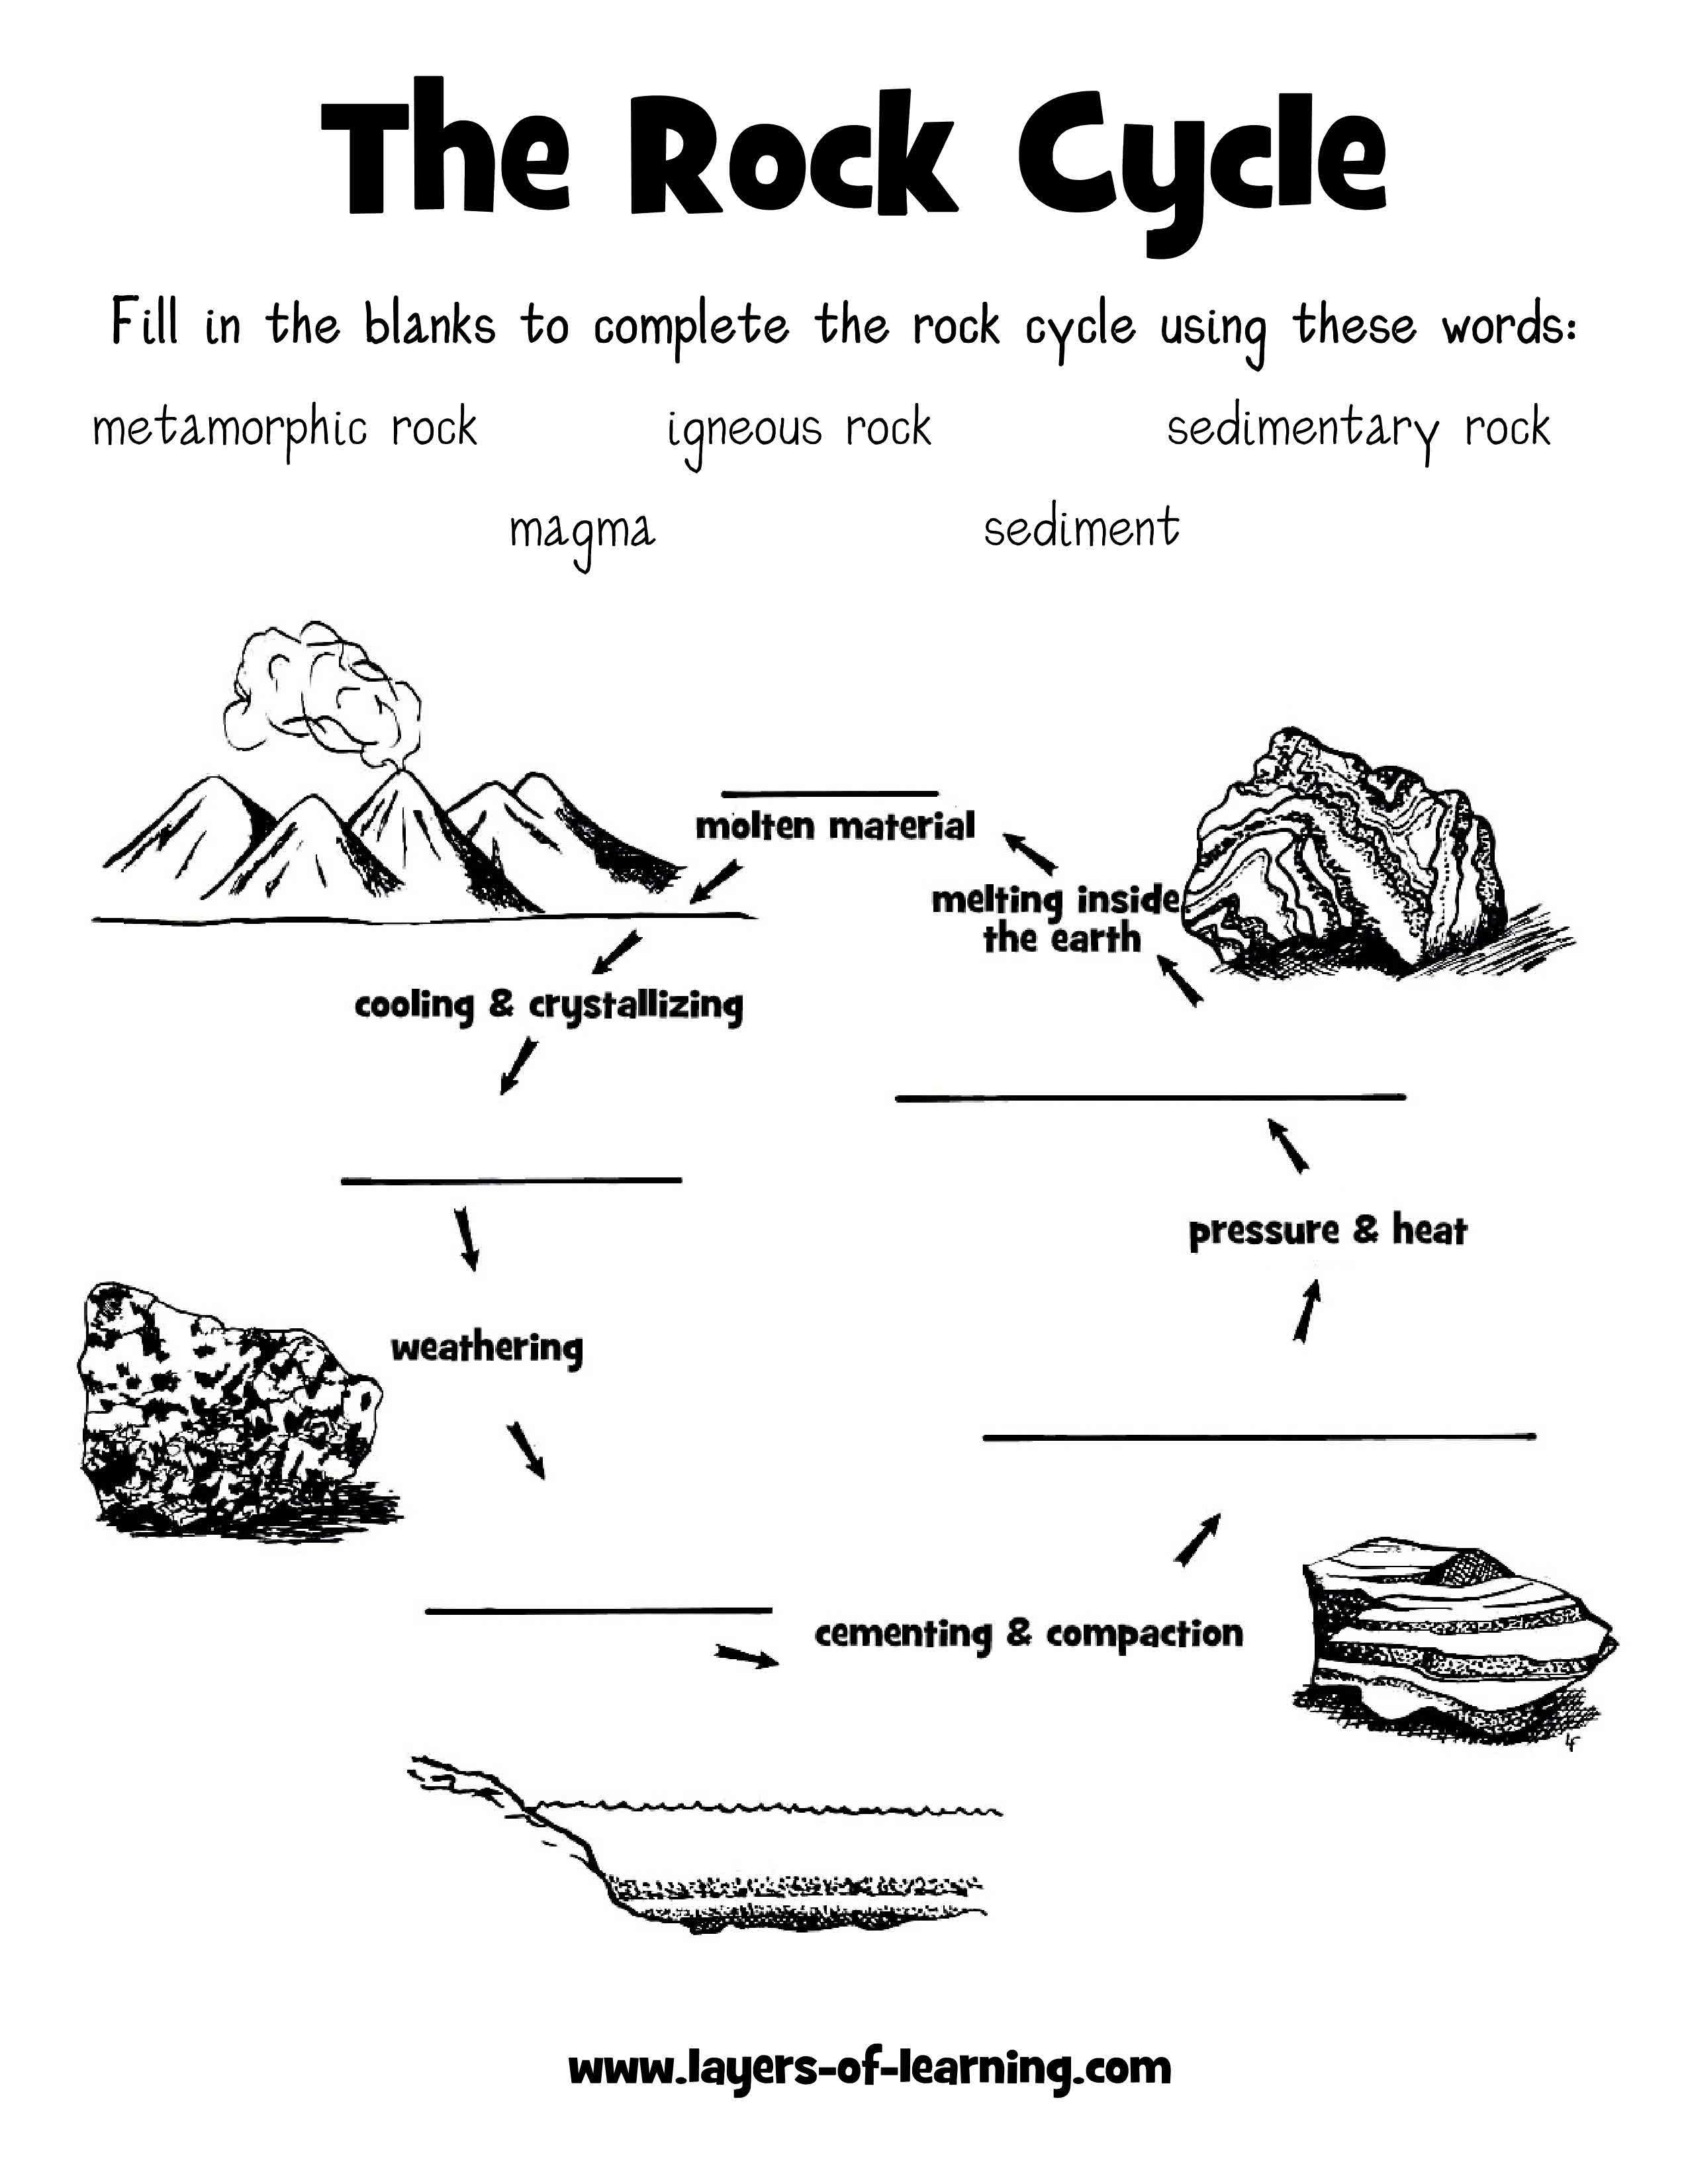 rock-cycle-worksheet-geography-activities-for-kids-worksheets-rock